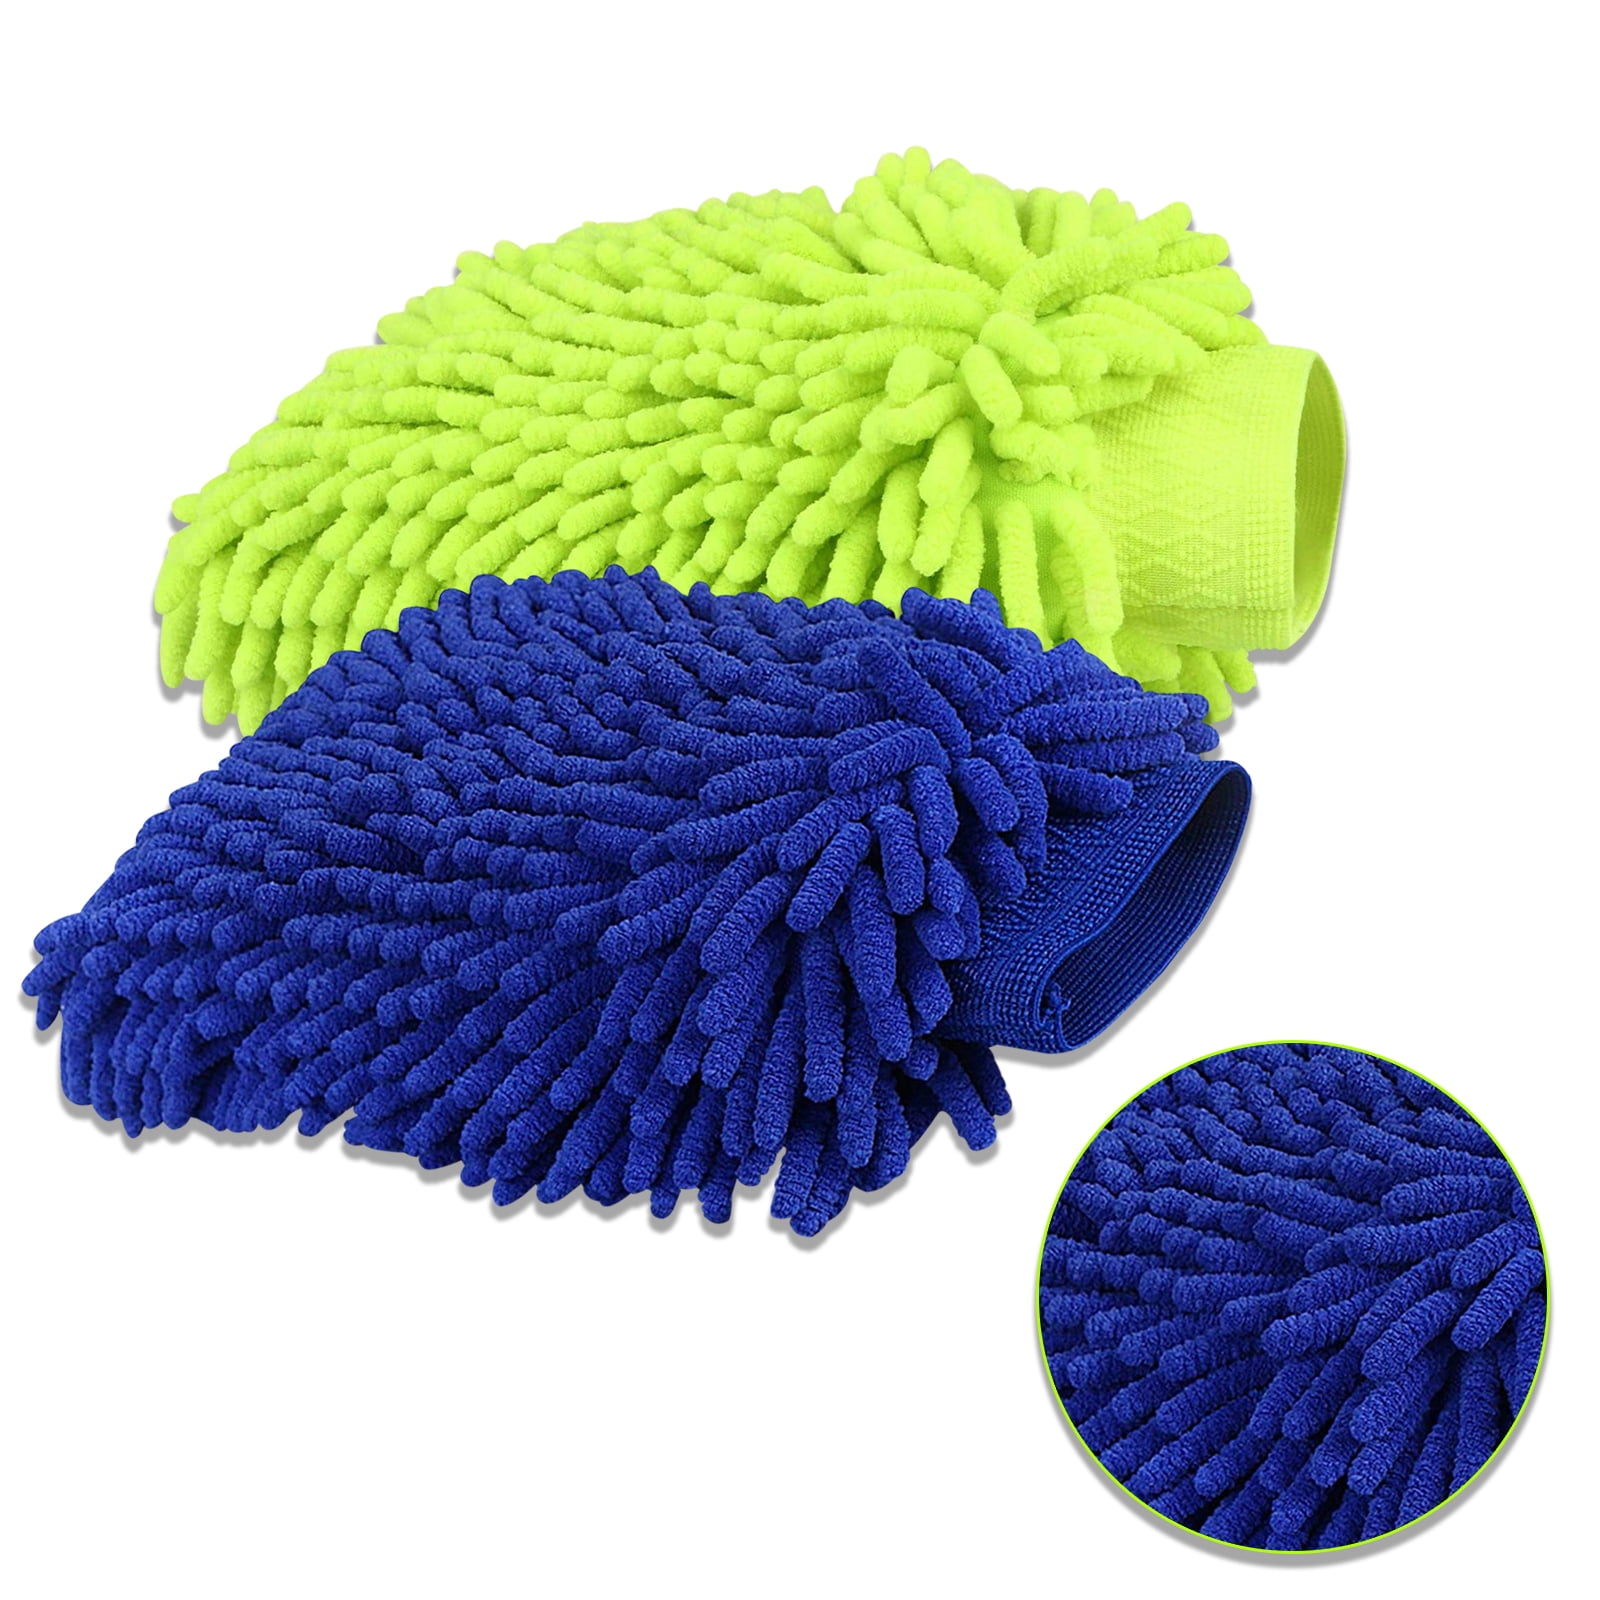 Absorbent Chenille Microfiber Car Kitchen House Wash Cleaning Glove Mitt w Towel 